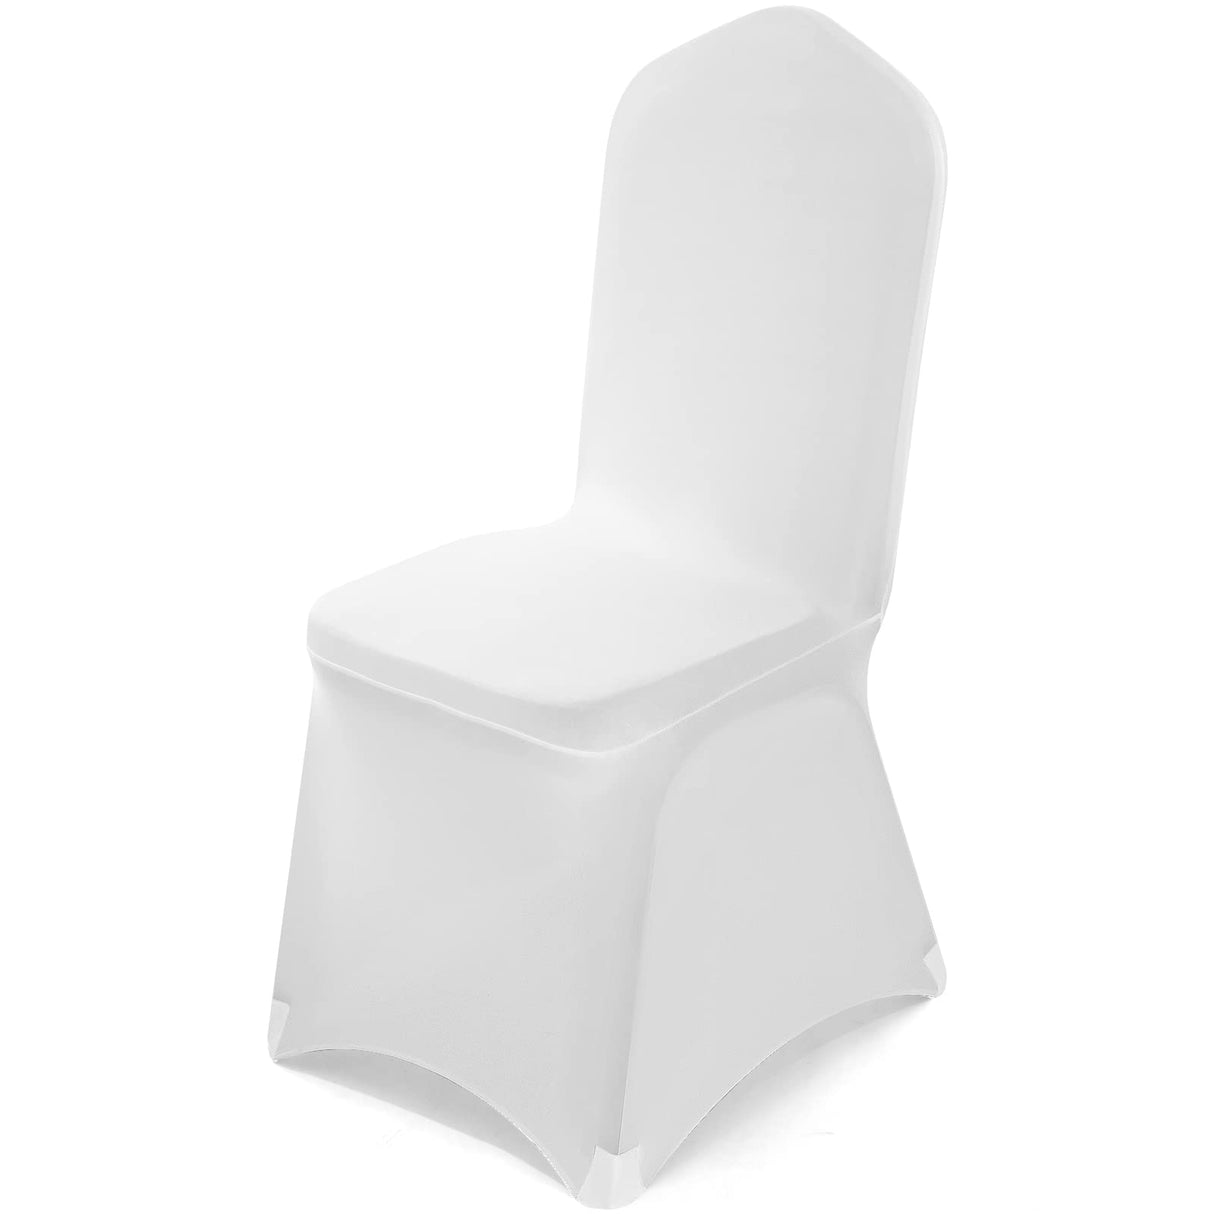 White chair cover placed on a chair.